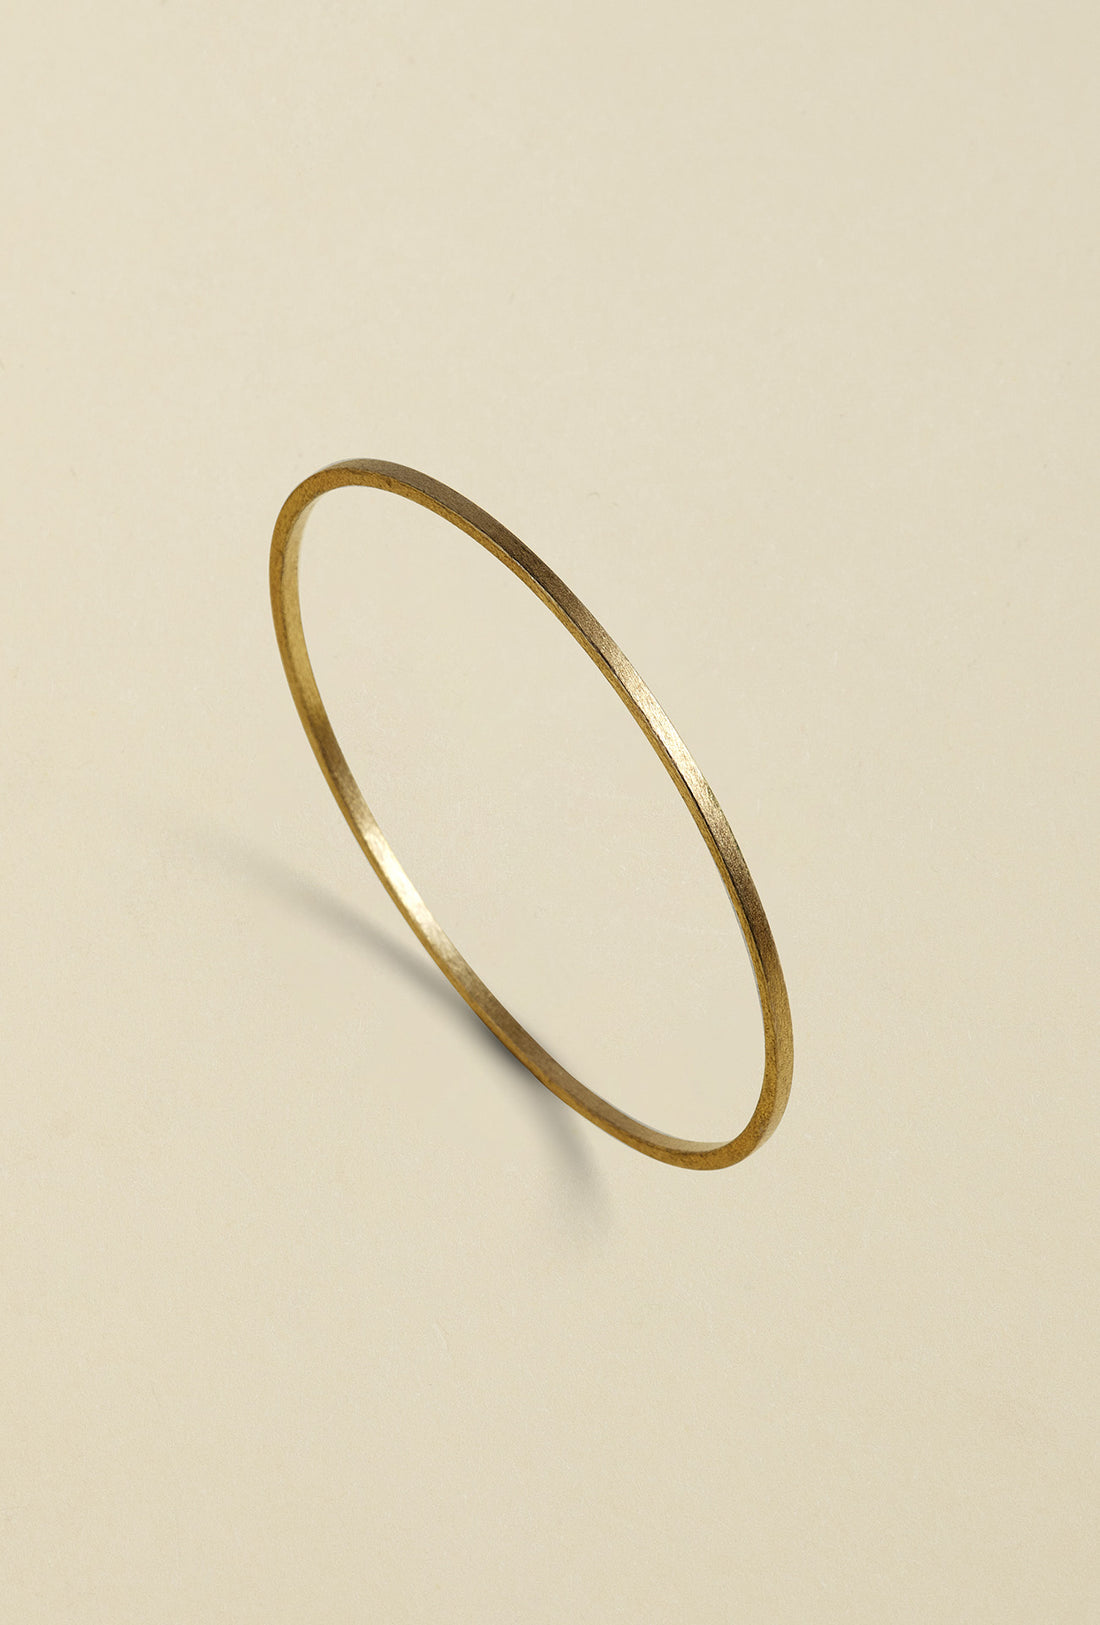 Handcrafted bronze bangle with a gold coating